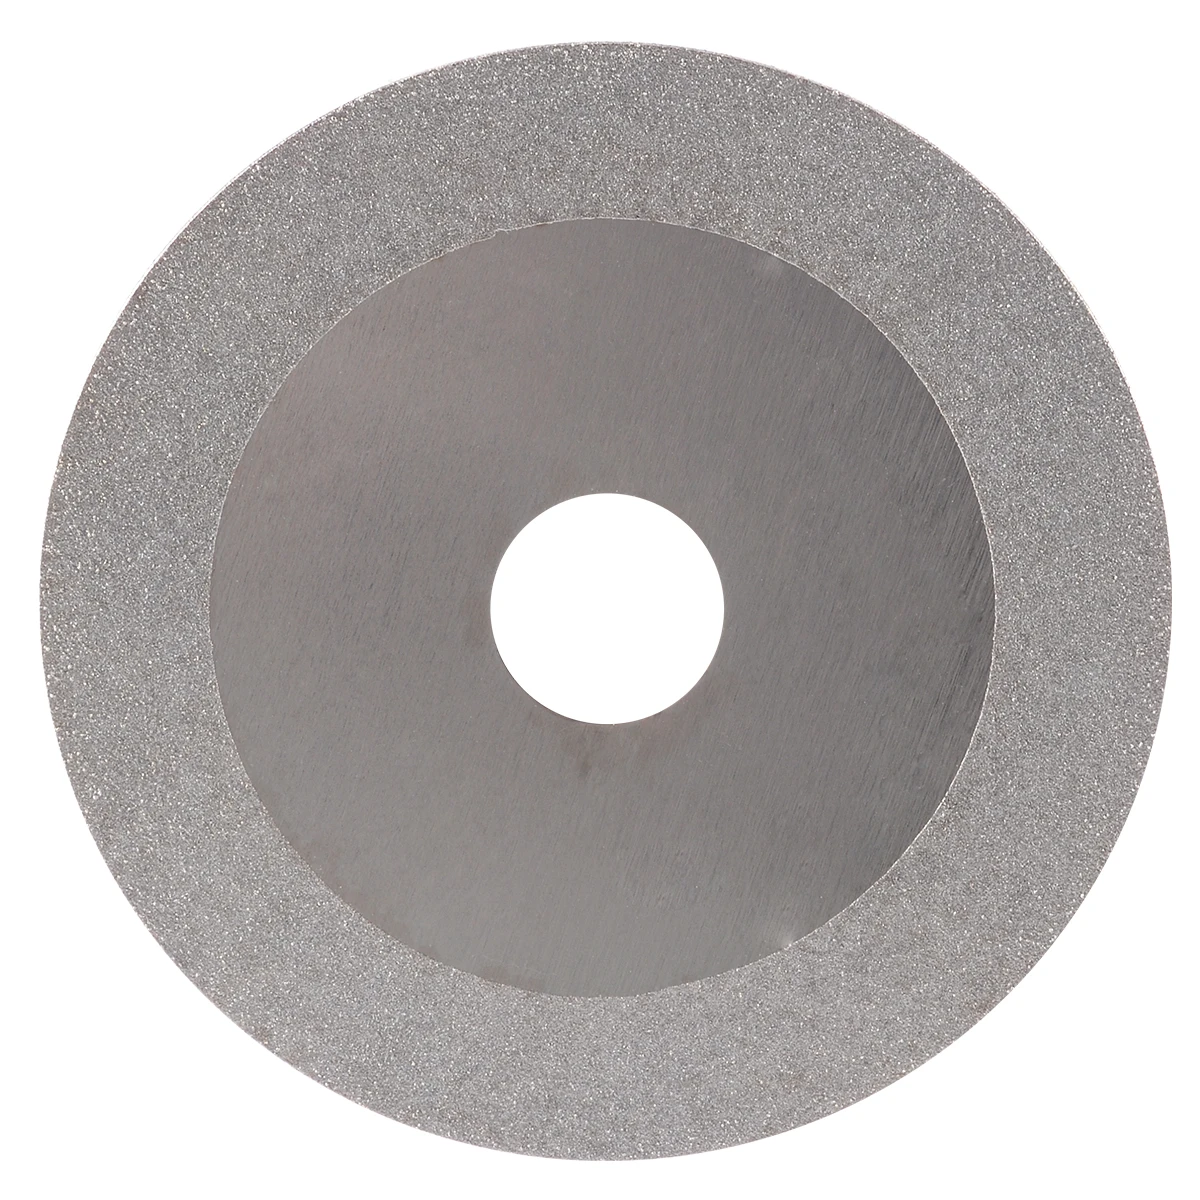 4inch Diamond Grinding Wheel Grinding Disc for Angle Grinder Disc Mini Grinder Saw Blade 100*20mm